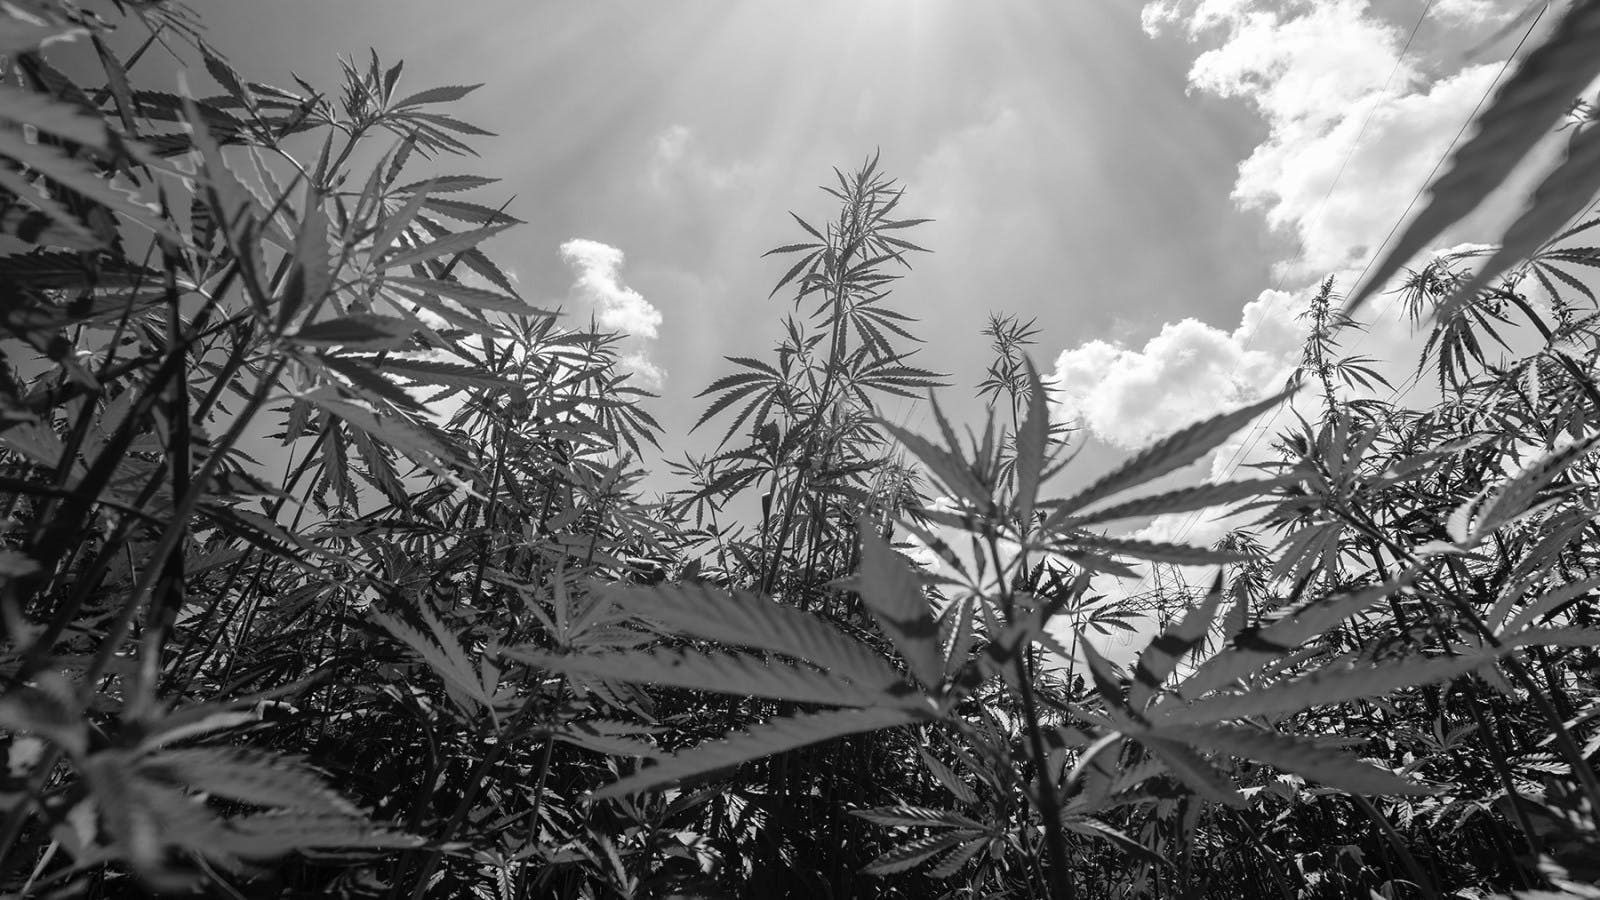 Saving the Cannabis Industry From a Downward Trajectory